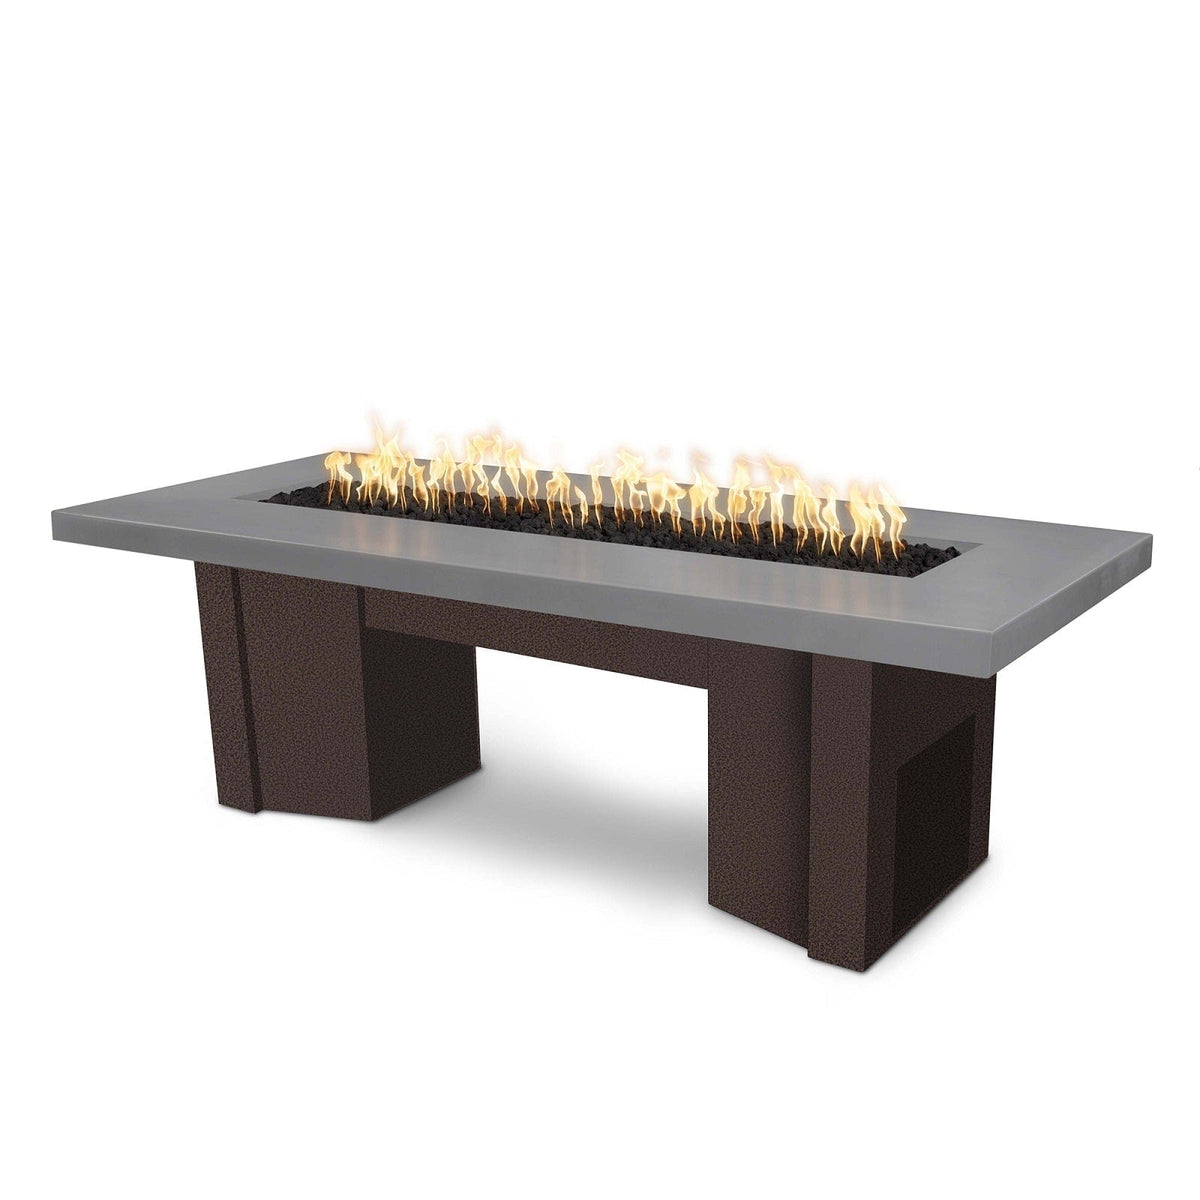 The Outdoor Plus Fire Features Natural Gray (-NGY) / Copper Vein Powder Coated Steel (-CPV) The Outdoor Plus 60&quot; Alameda Fire Table Smooth Concrete in Liquid Propane - Flame Sense System with Push Button Spark Igniter / OPT-ALMGFRC60FSEN-LP